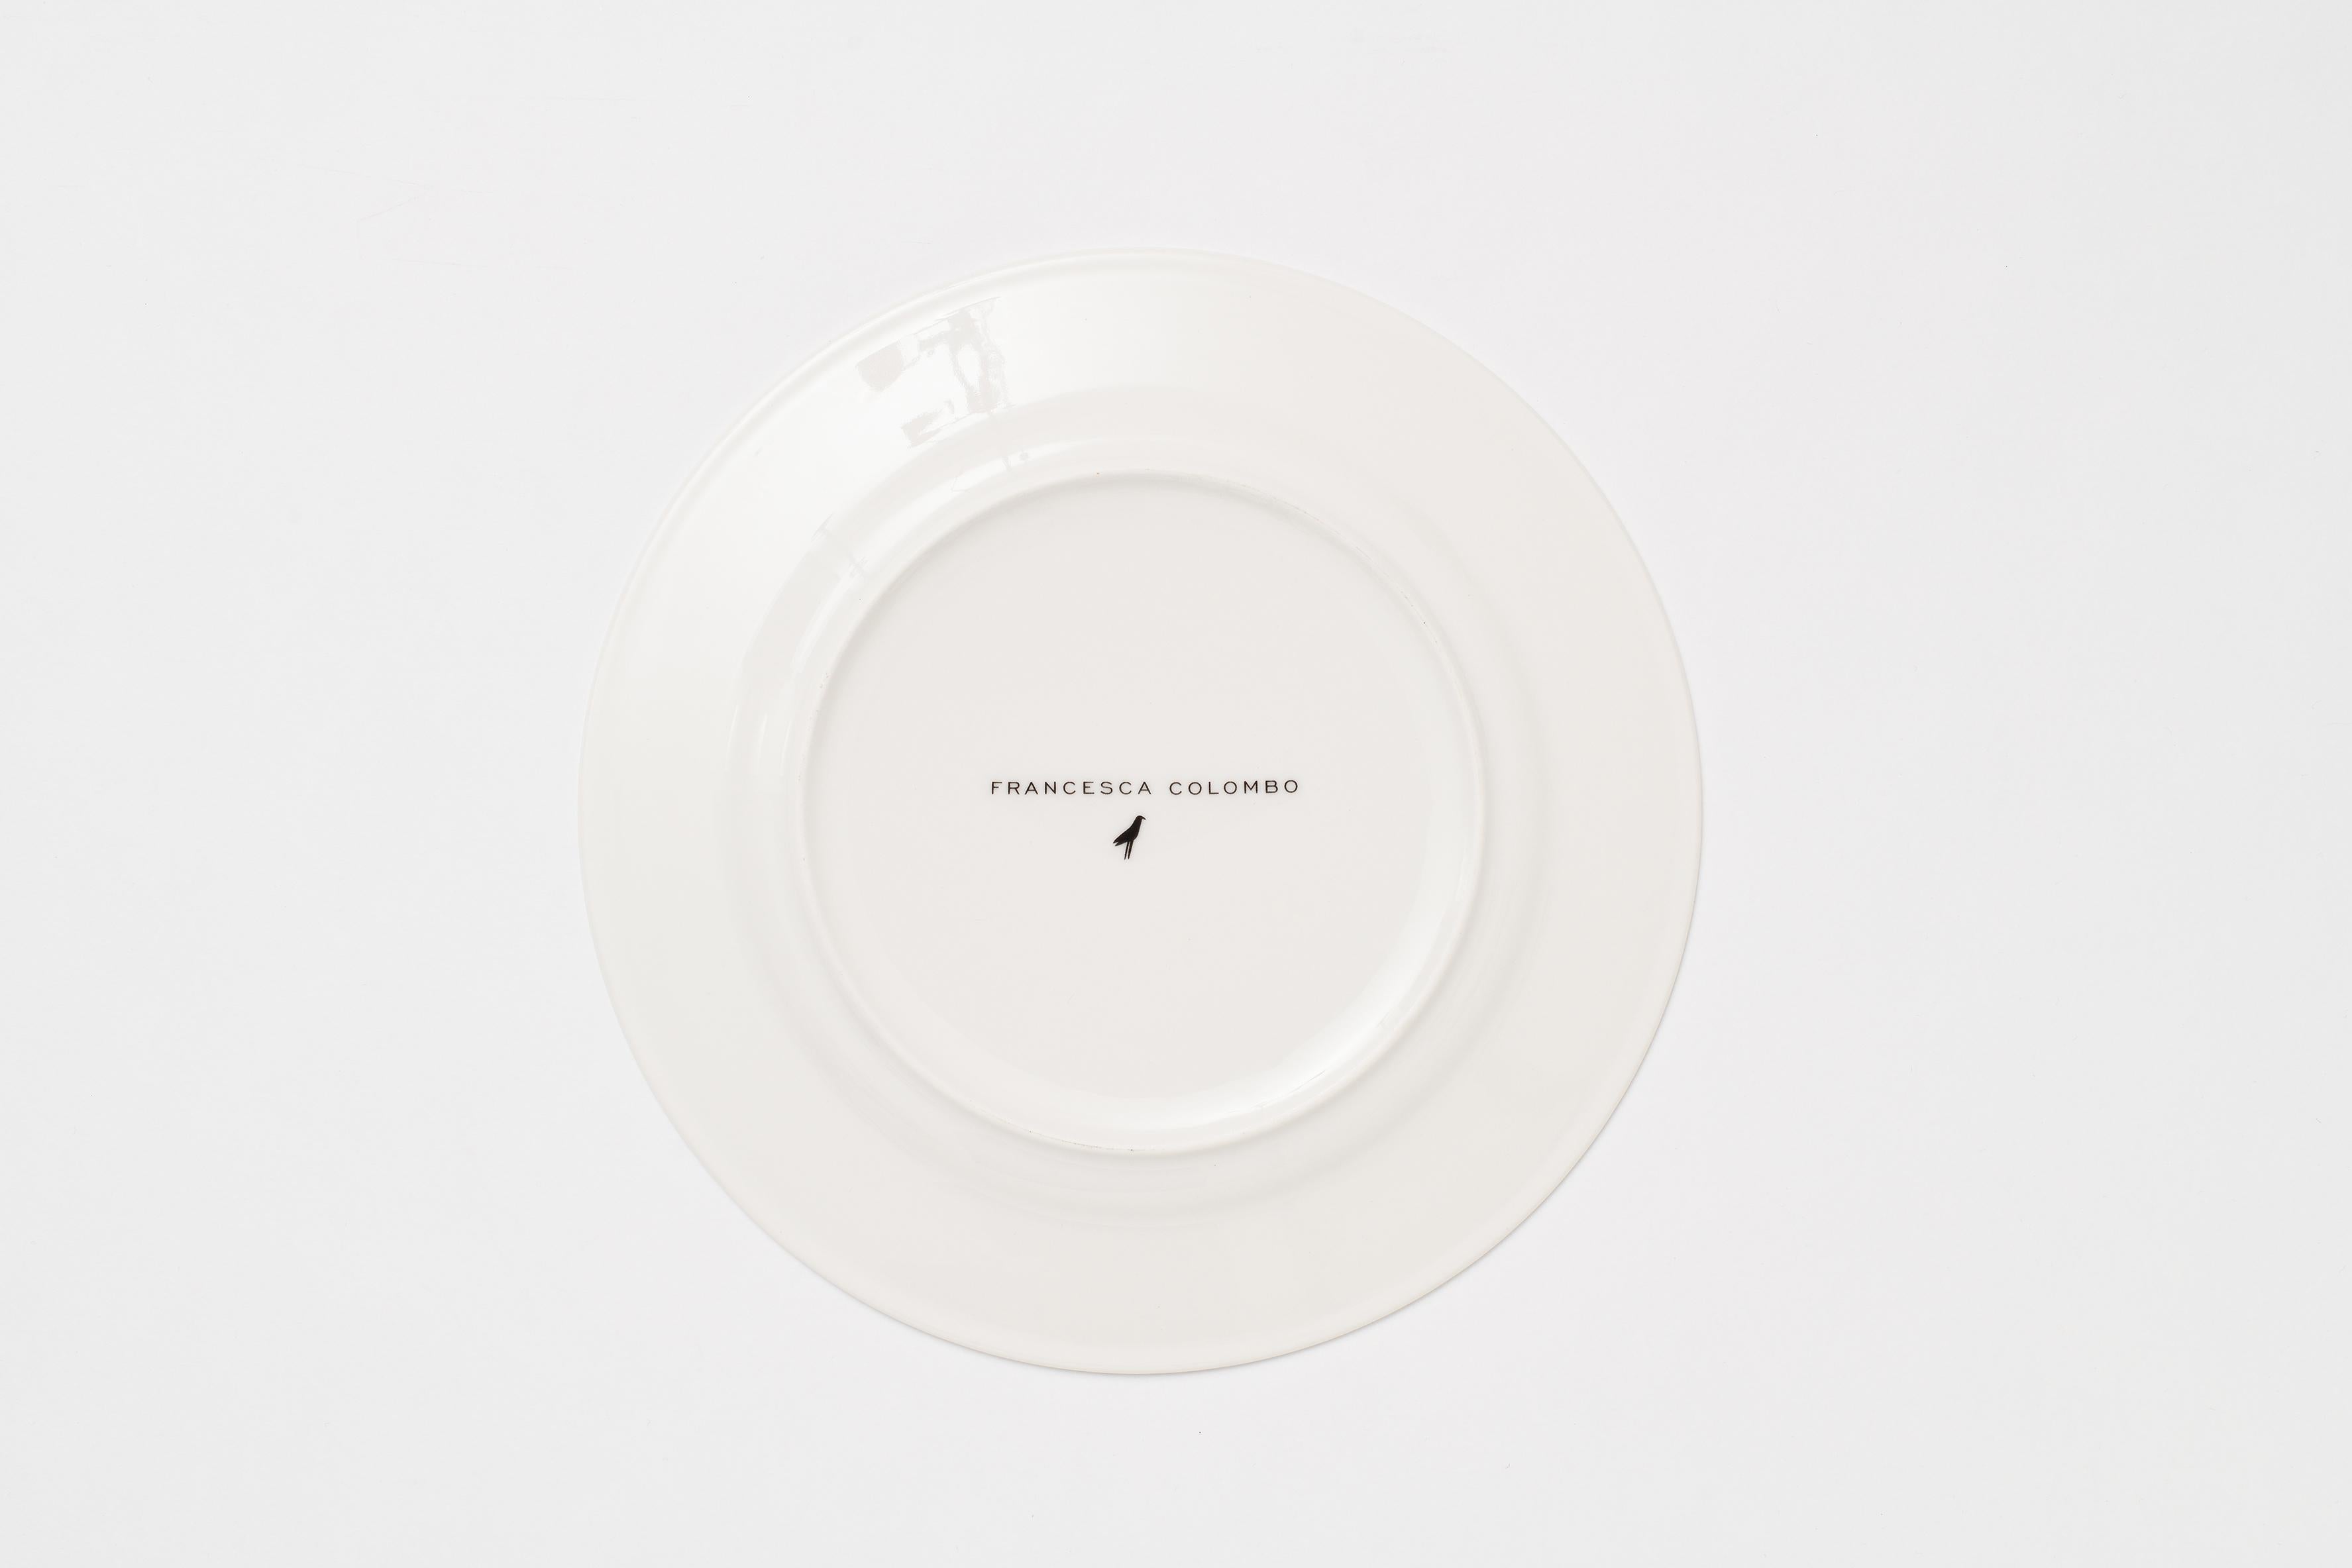 A white taled deer, a typical animal of the woods is gently painted on this dinner plate, with soft black tones and it is surrounded by a delicate and intriguing mix of wild flowers and leaves reinterpreted in a fresh and poetic color way. These